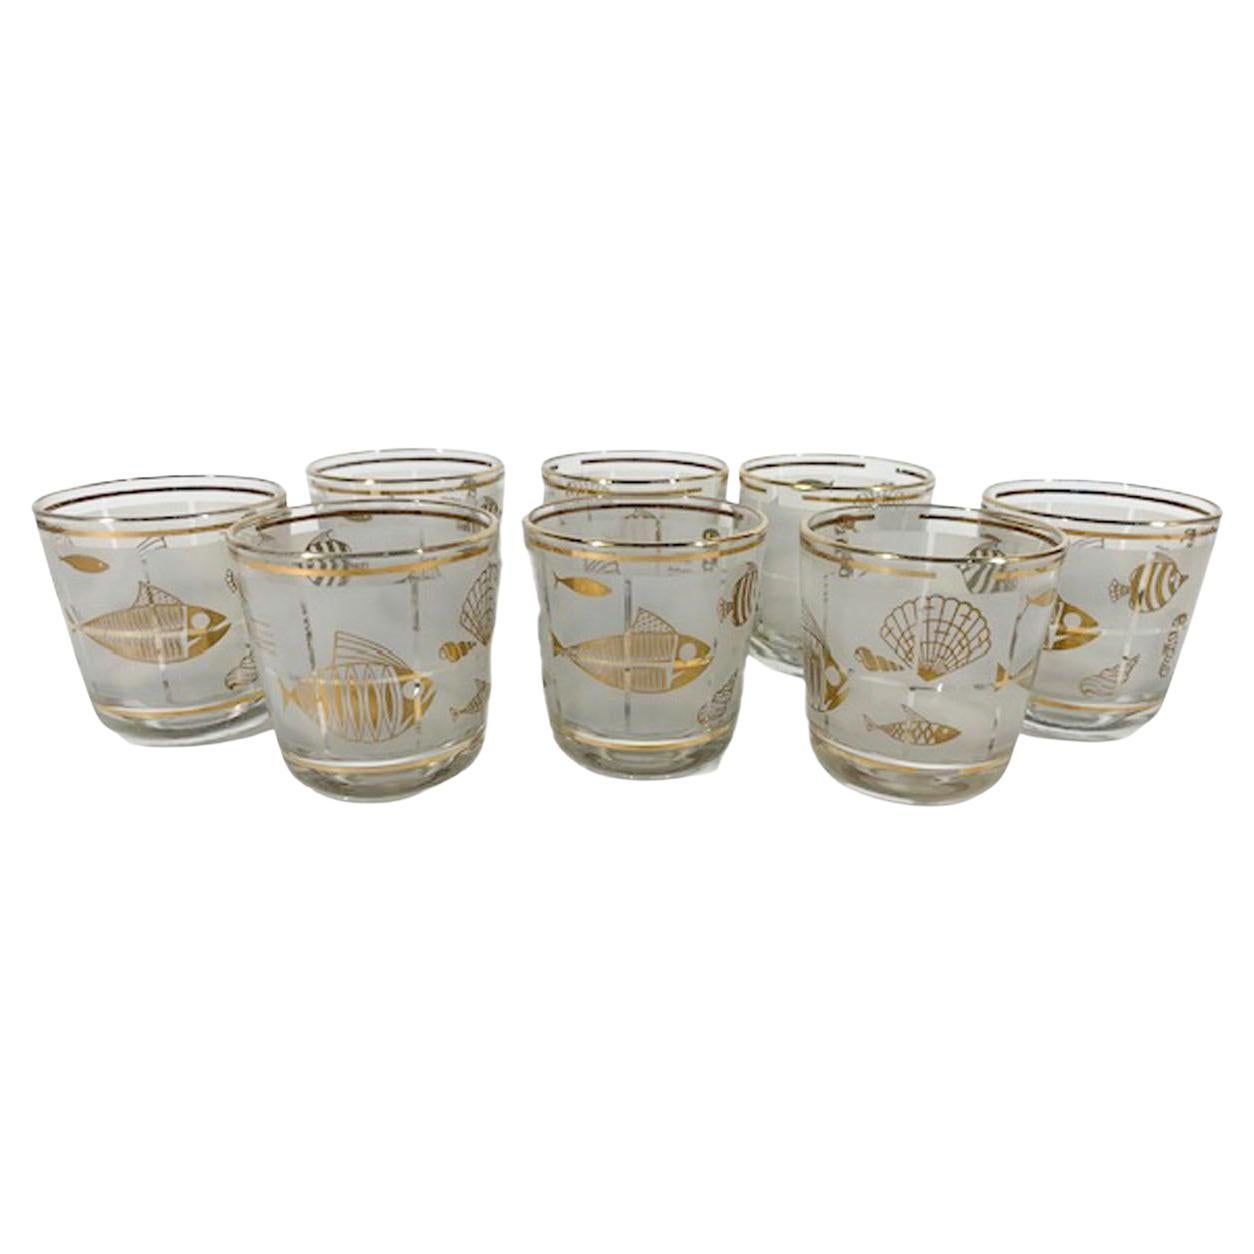 https://a.1stdibscdn.com/eight-mid-century-old-fashioned-glasses-in-frosted-marine-life-pattern-for-sale/f_13752/f_268325221641754929971/f_26832522_1641754930237_bg_processed.jpg